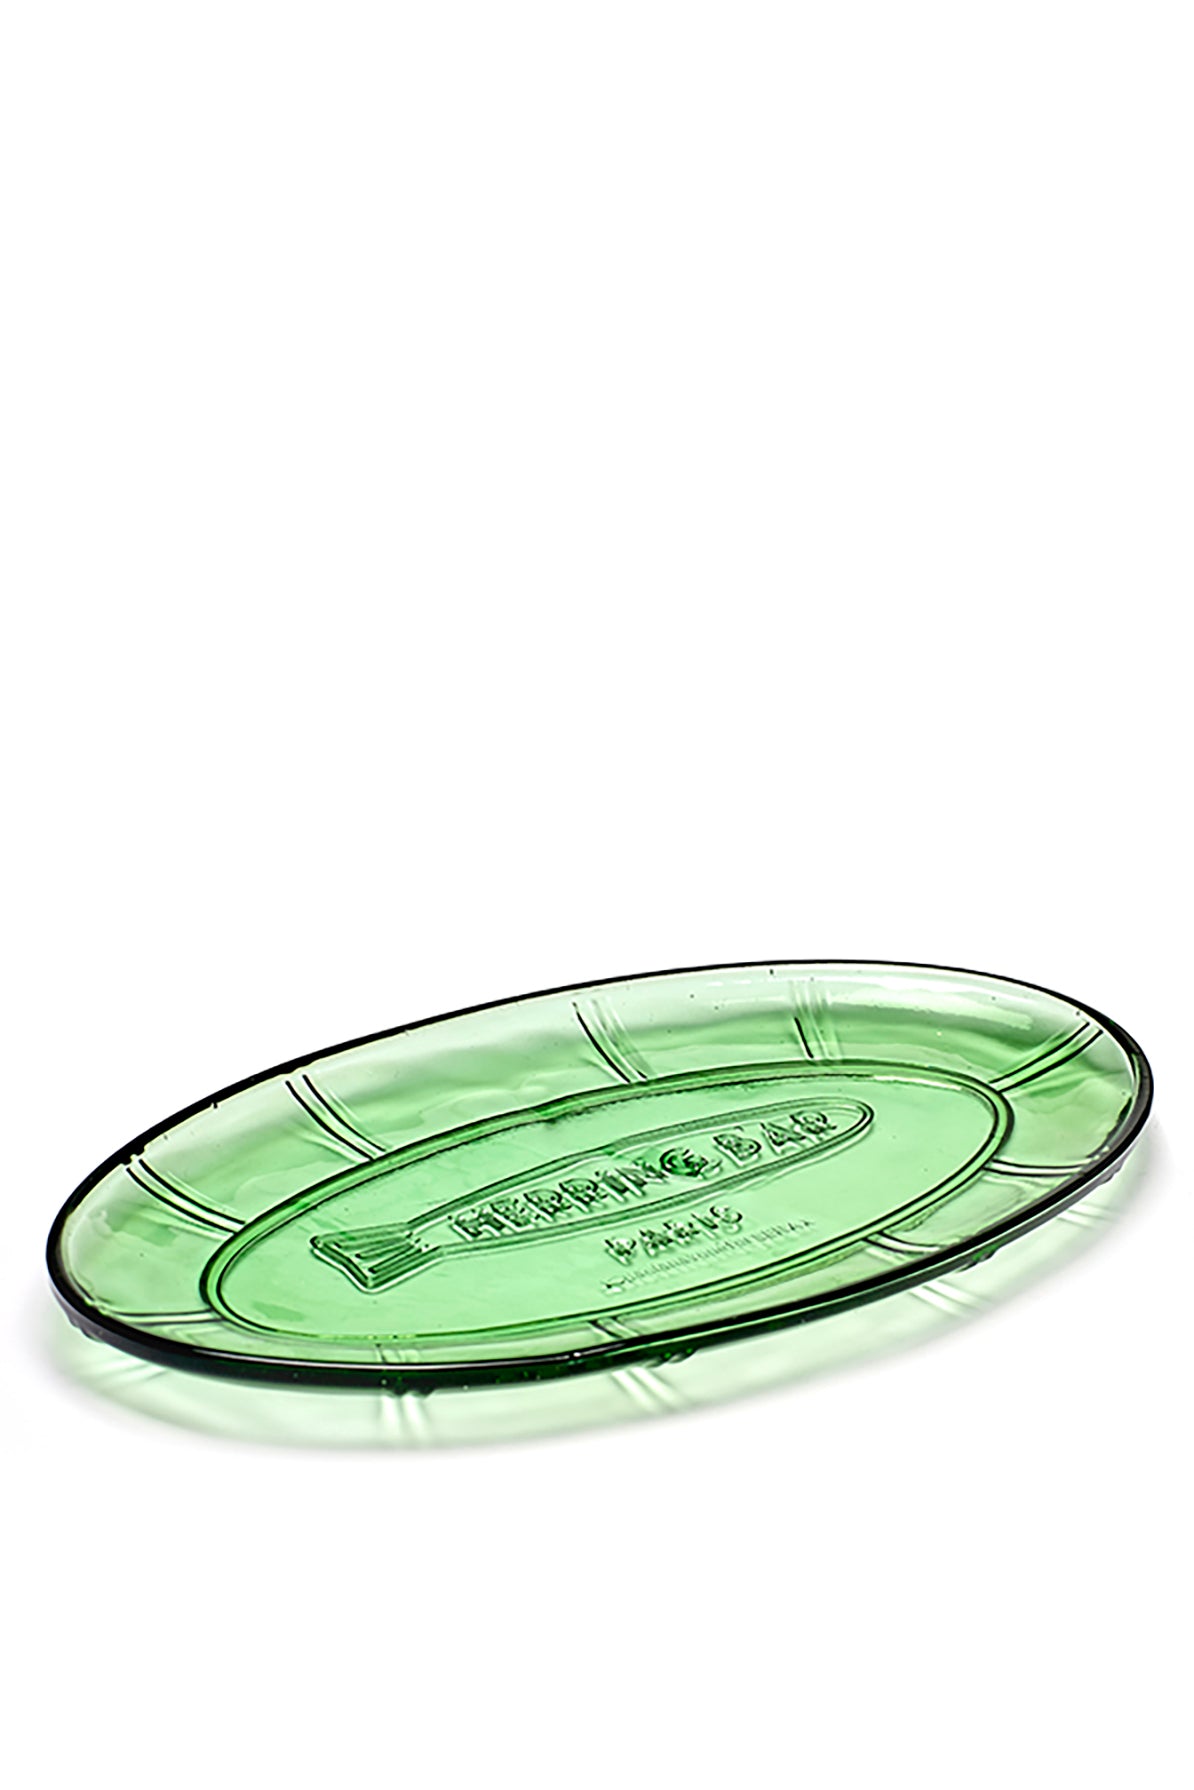 Fish & Fish Large Oval Serving Plate, Green